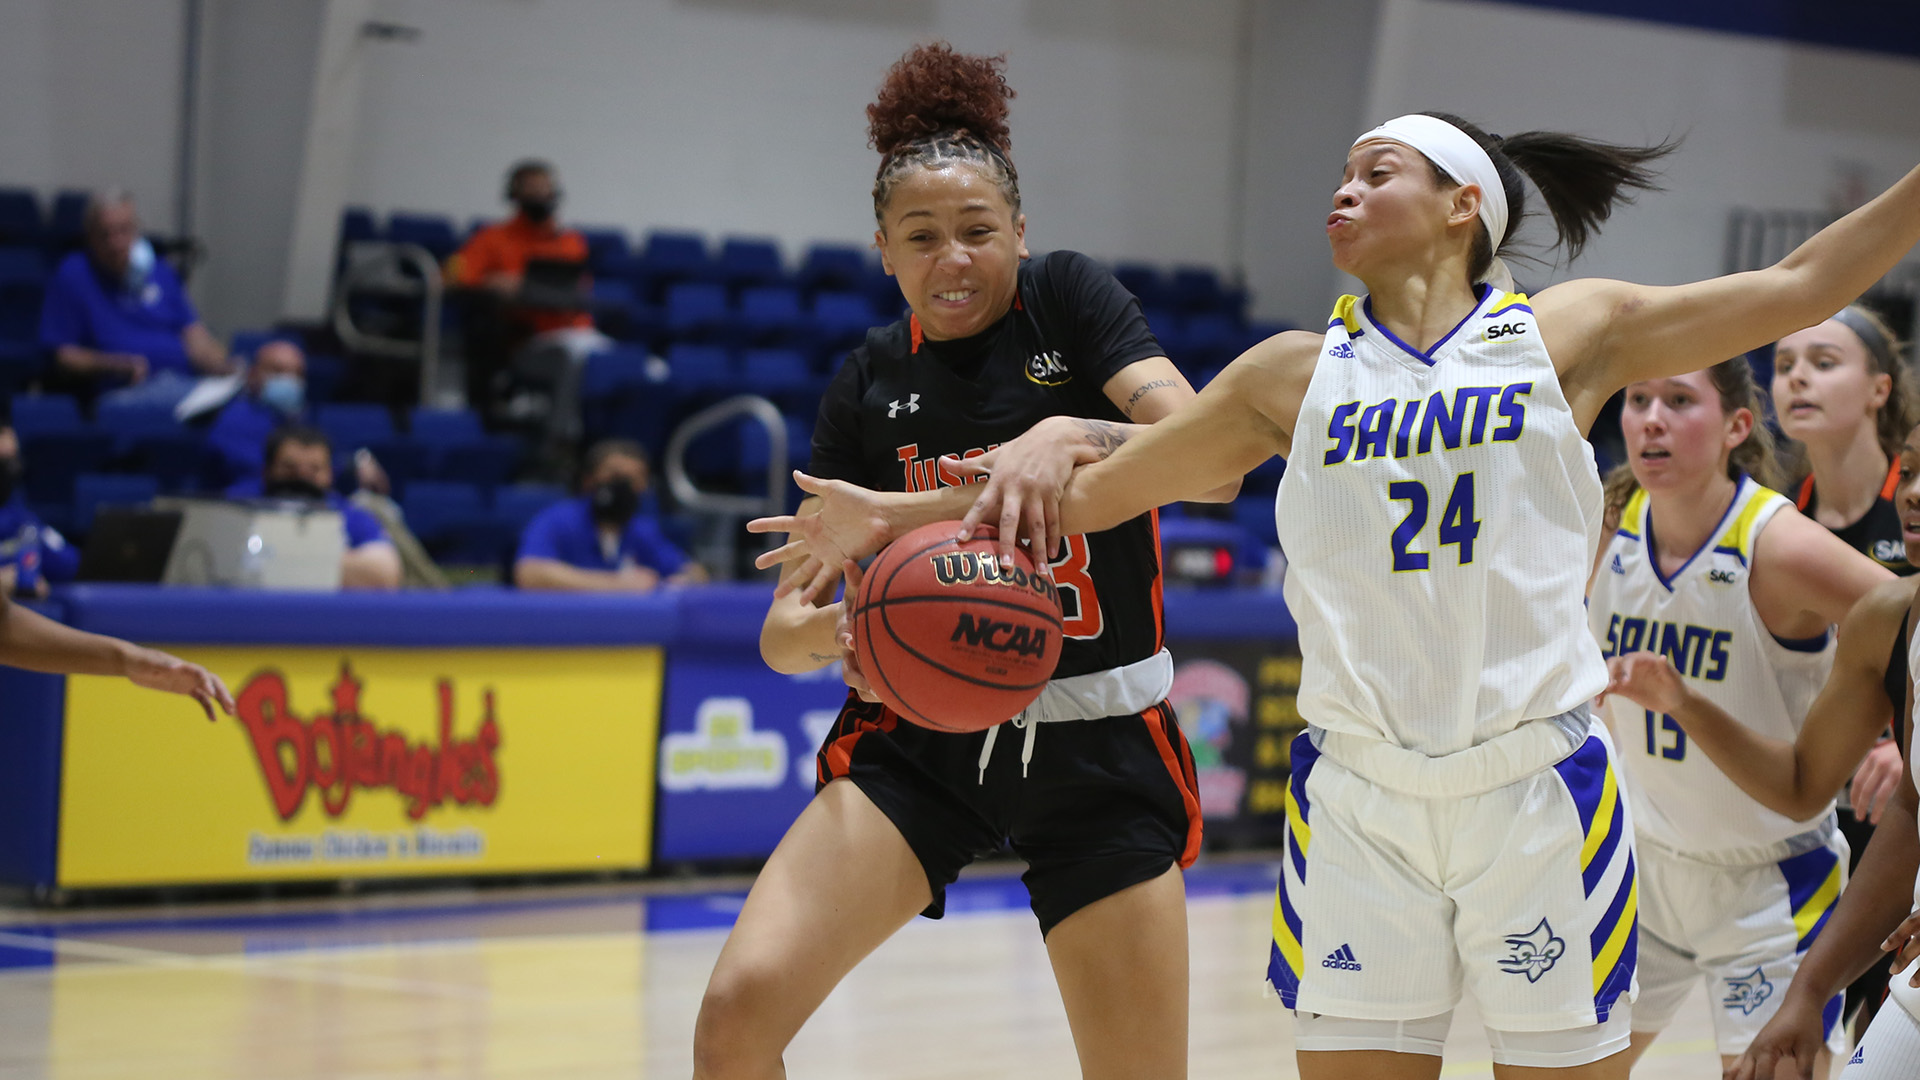 Mya Belton made four three-pointers and scored a season-high 12 points off the bench against Limestone